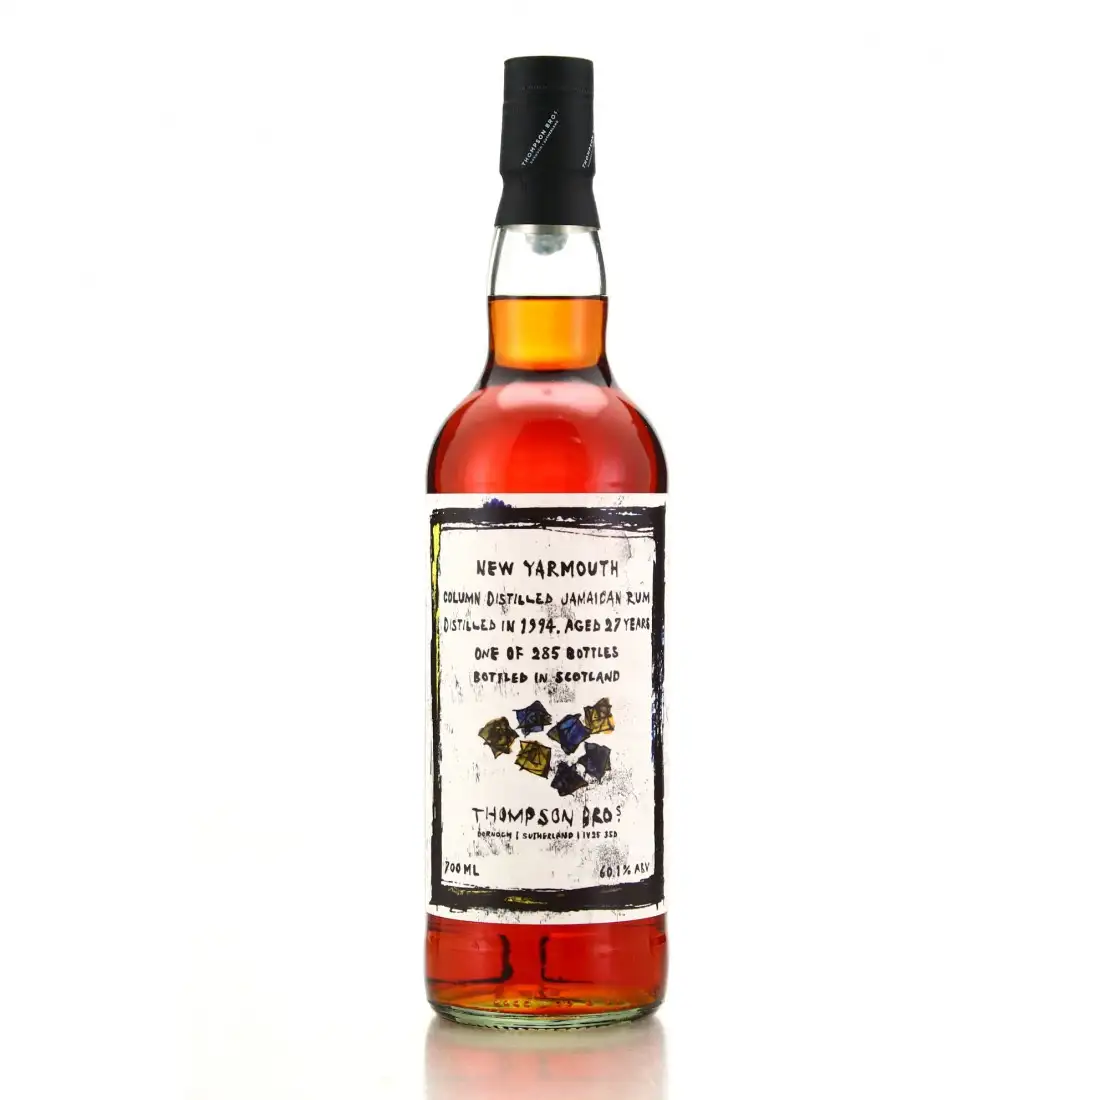 Image of the front of the bottle of the rum 1994